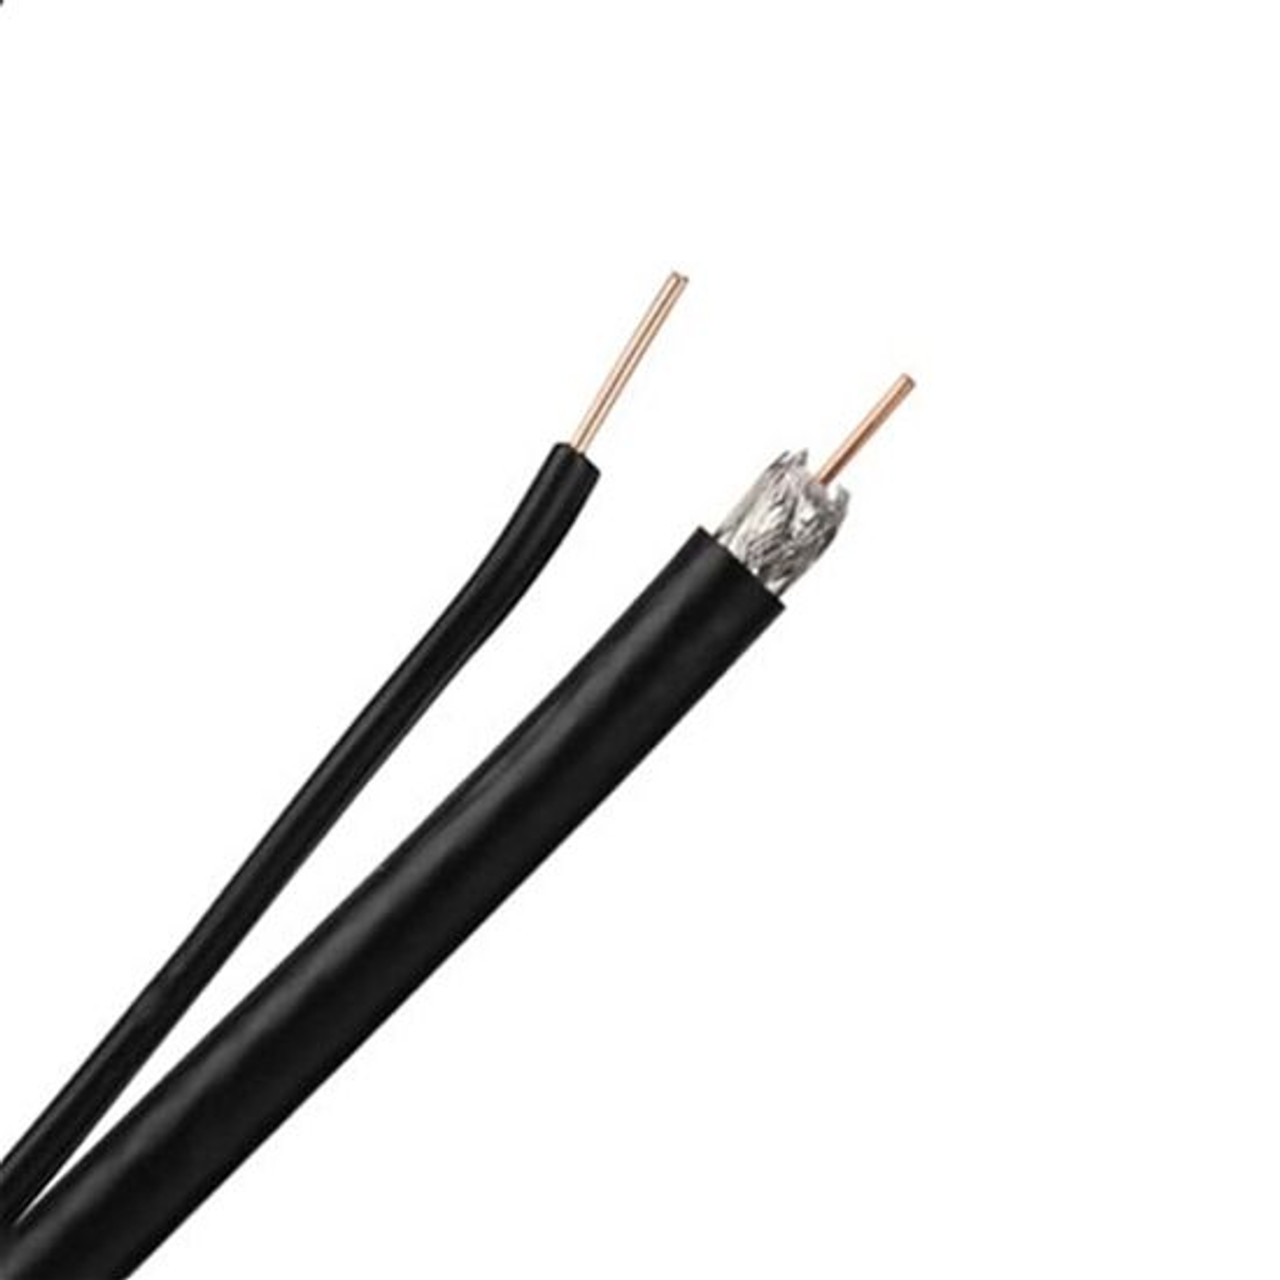 Eagle 500 FT RG6 Coaxial Cable Solid Copper Black with Ground Wire 18 AWG UL Listed 3 GHz DirecTV Approved Satellite Digital HDTV CATV Bulk